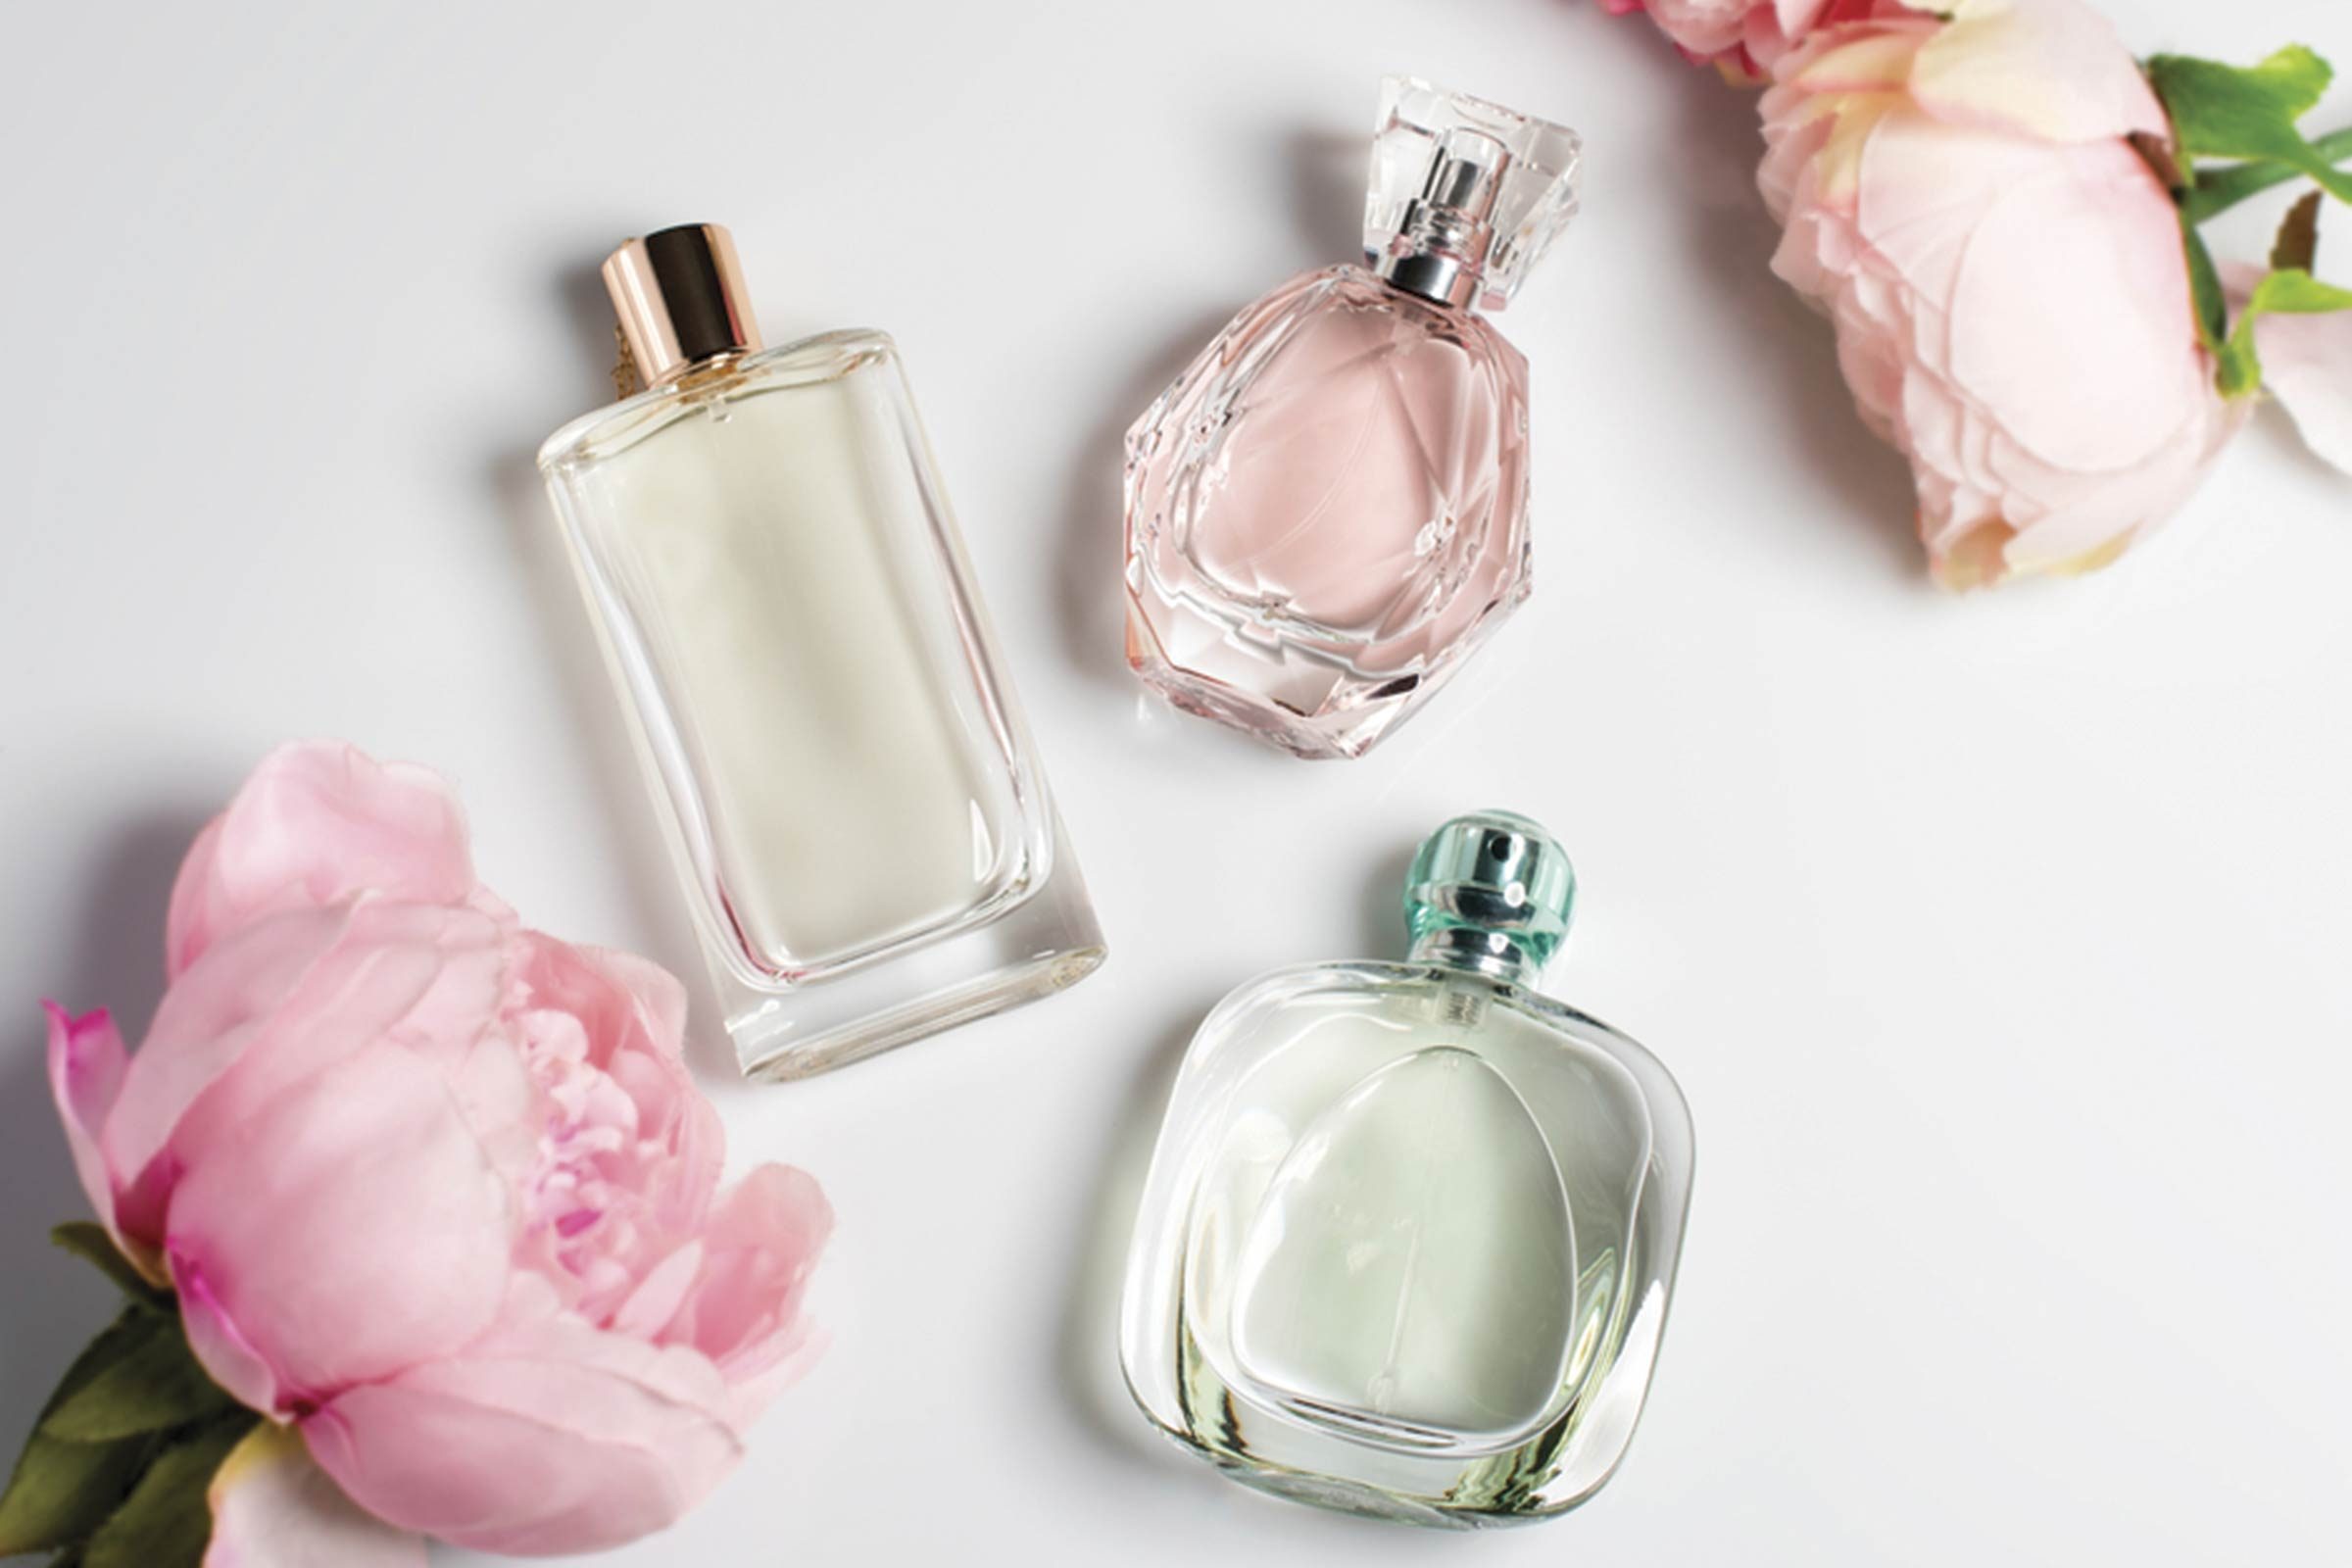 What is your favorite scent and brand of perfume? - Quora